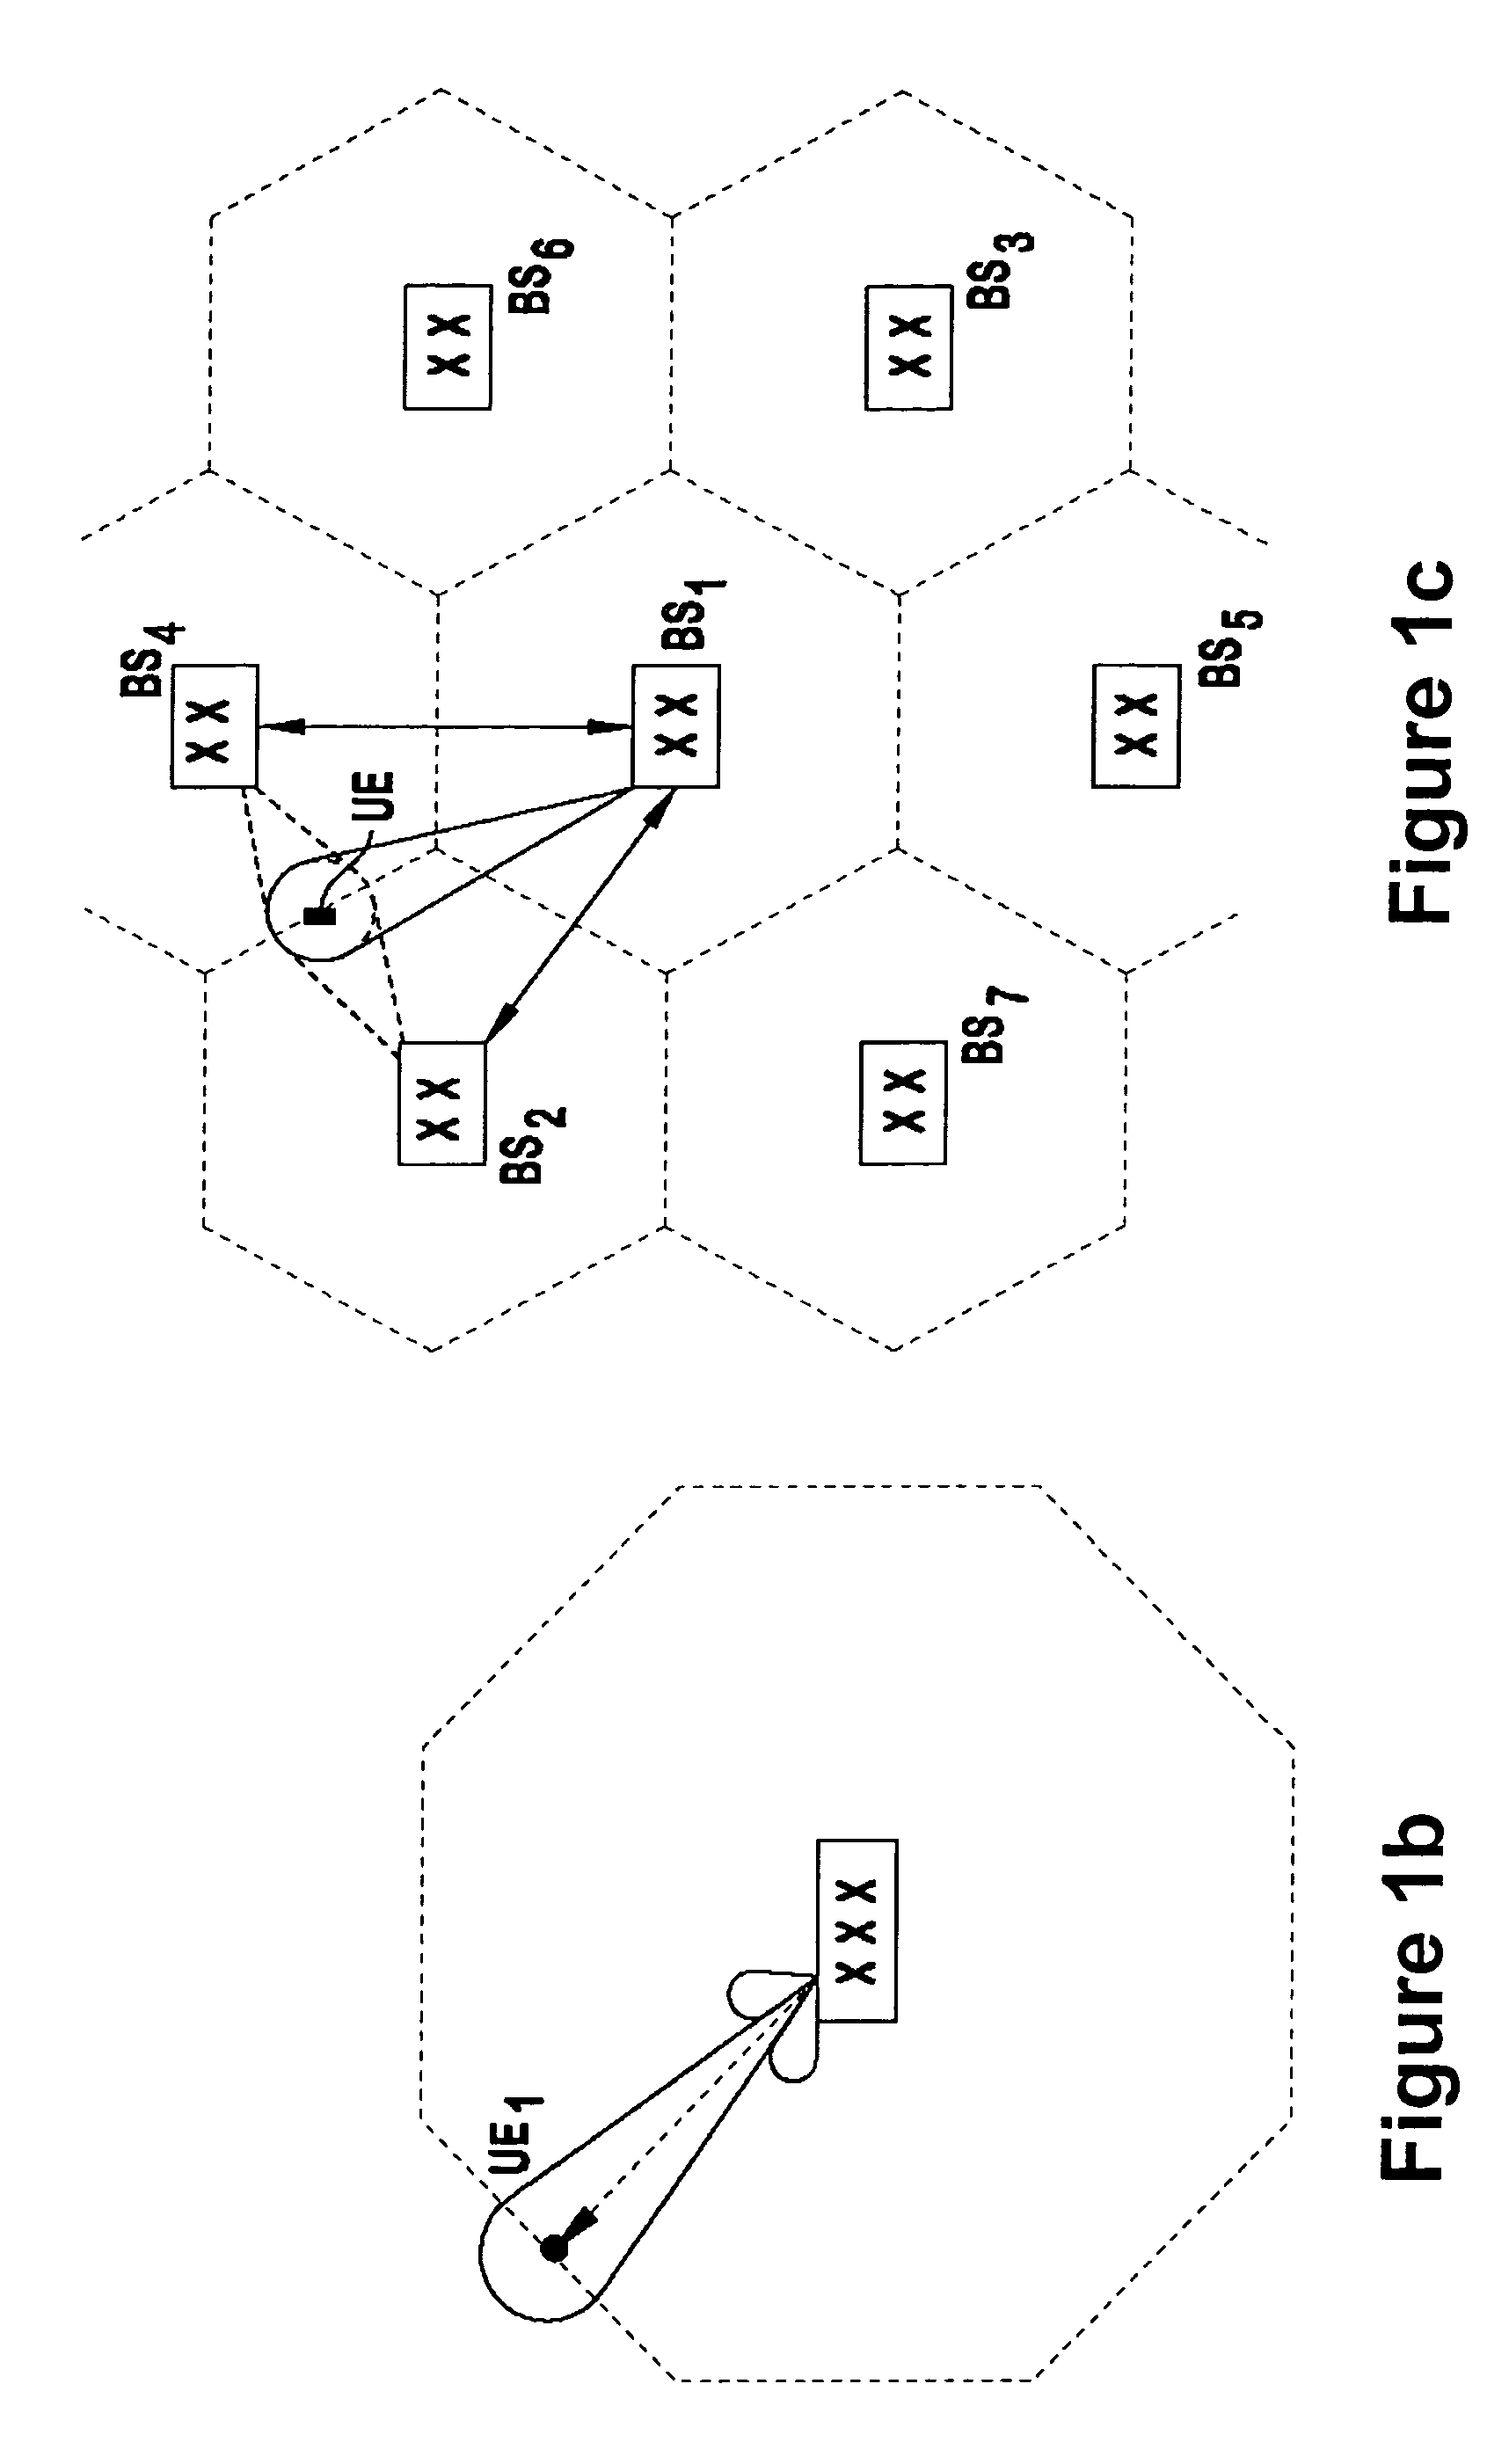 Mobile communications system and method for providing common channel coverage using beamforming antennas